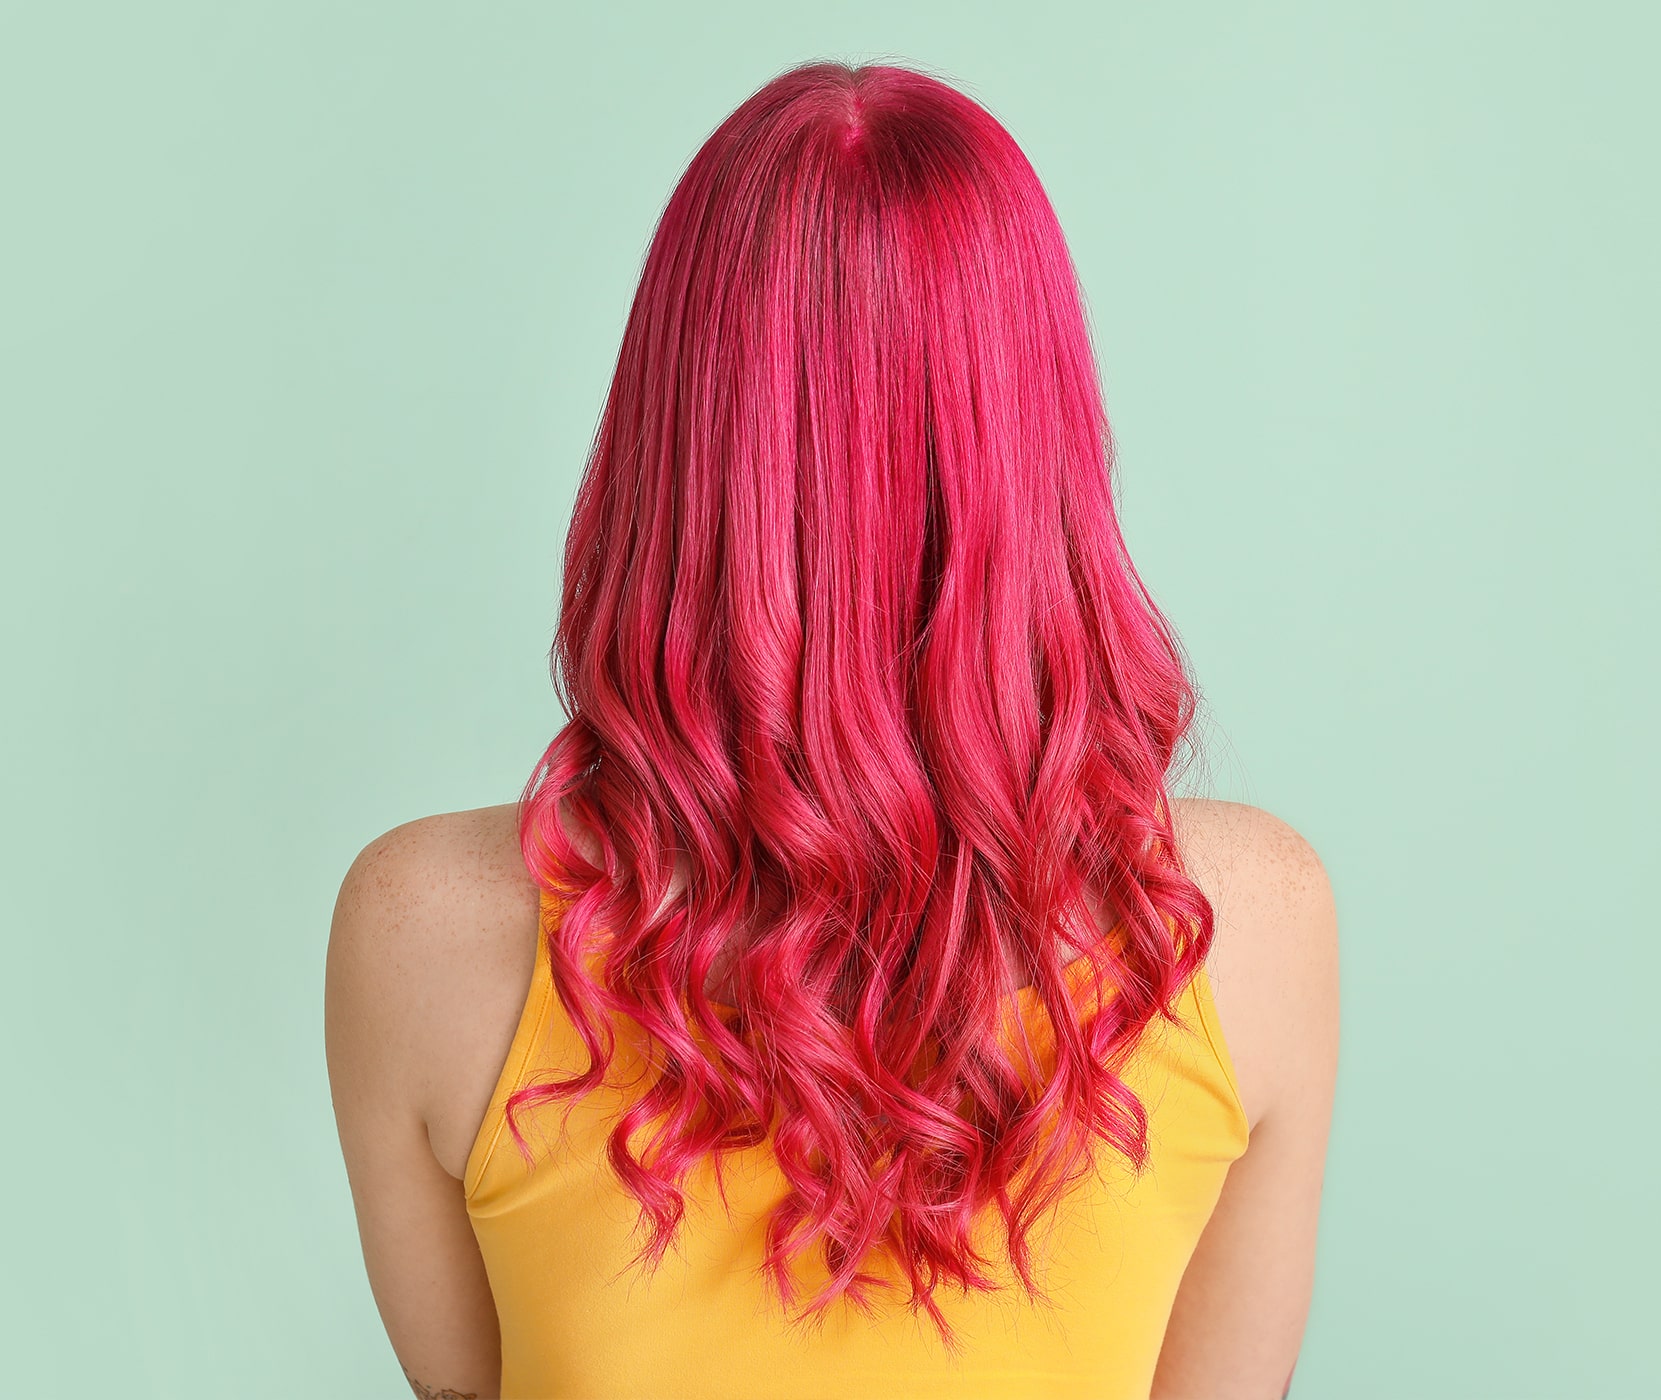 Woman's dyed pink hair